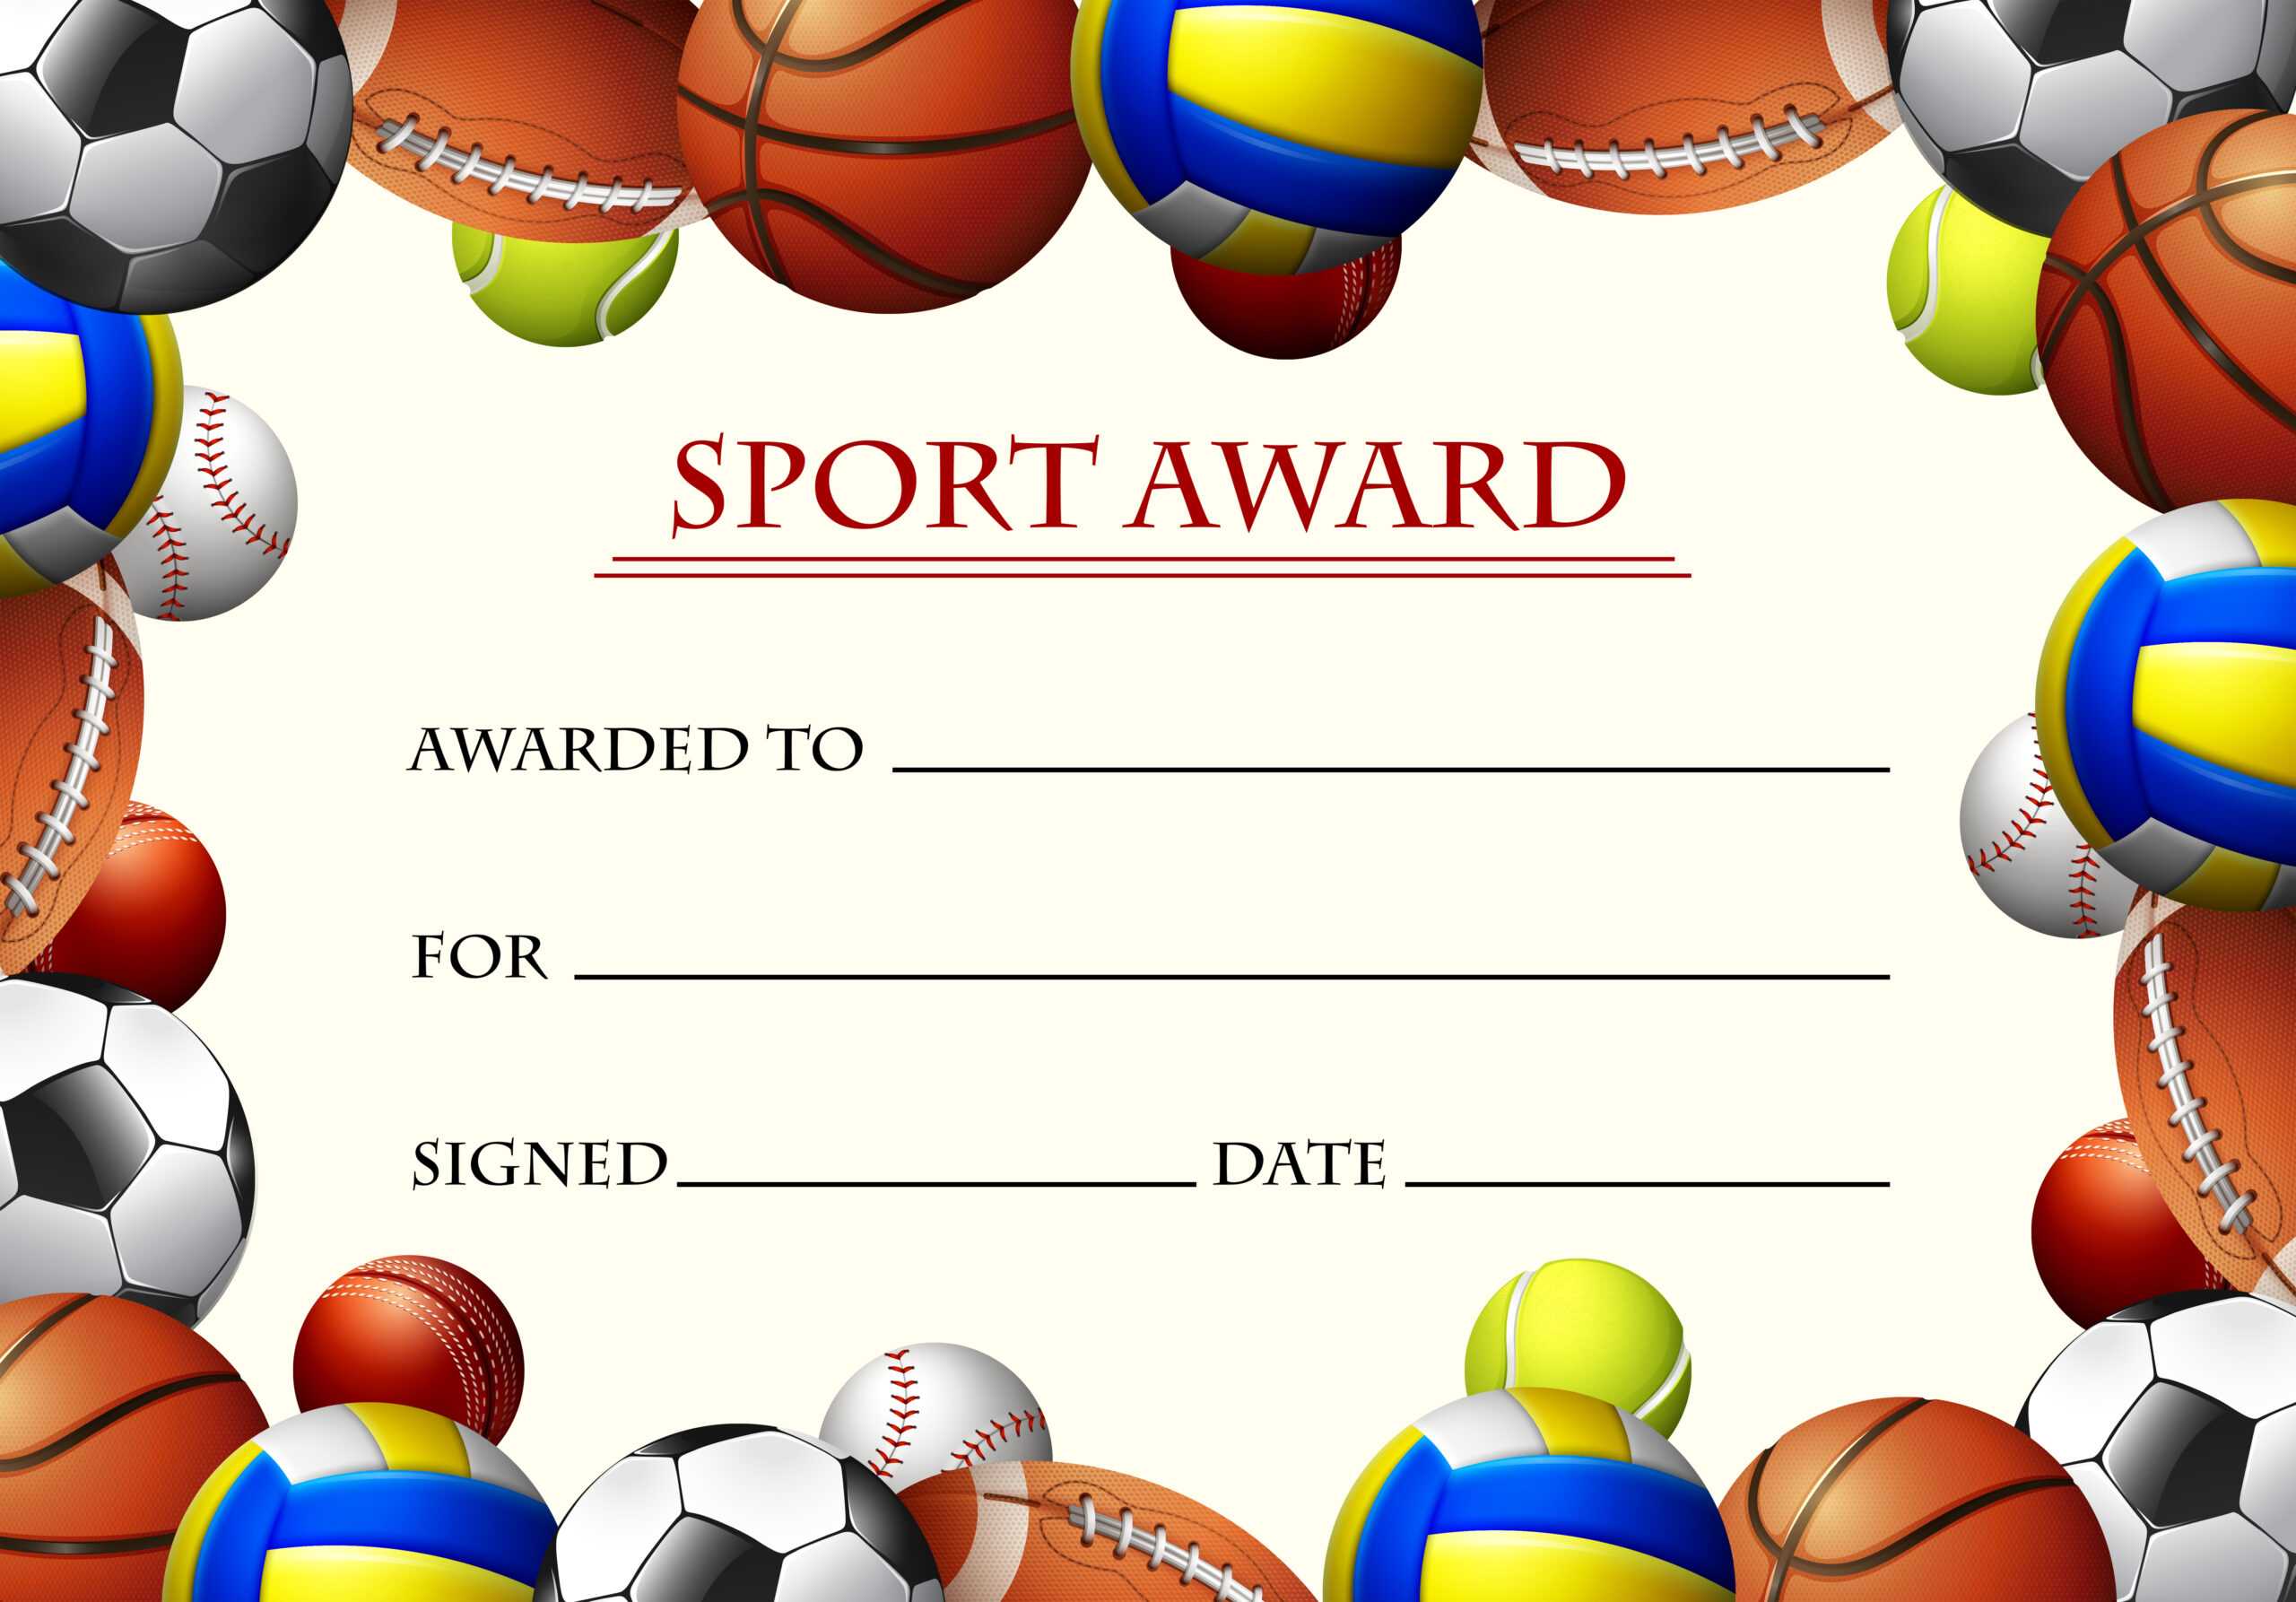 Certificate Template For Sport Award – Download Free Vectors Inside Soccer Award Certificate Templates Free